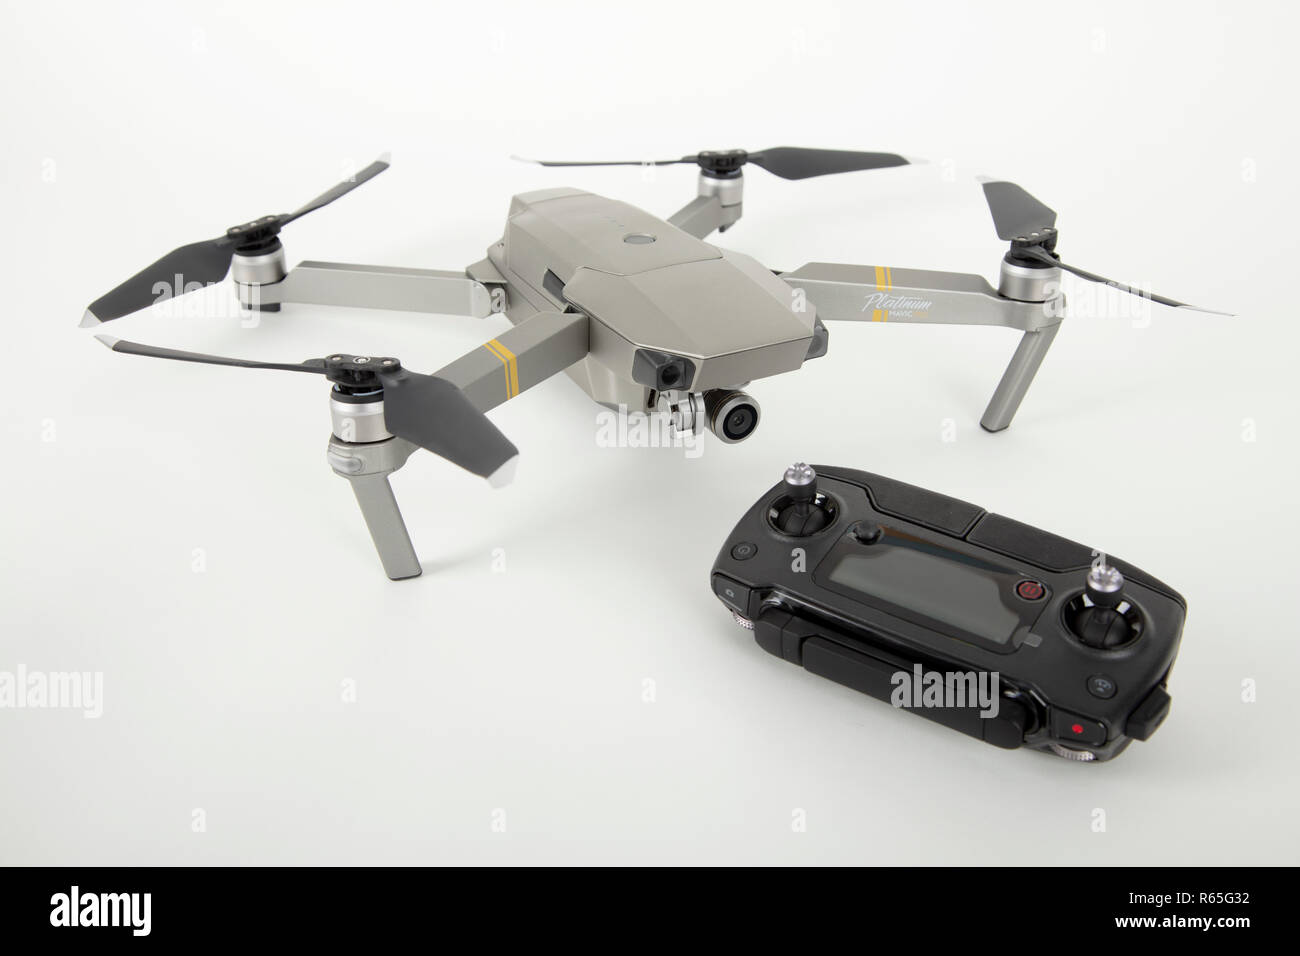 HUETTENBERG, GERMANY - APRIL 22, 2018: Drone on white background, DJI Mavic  Pro Platinum. DJI is one of the most popular manufacturers of consumer dro  Stock Photo - Alamy